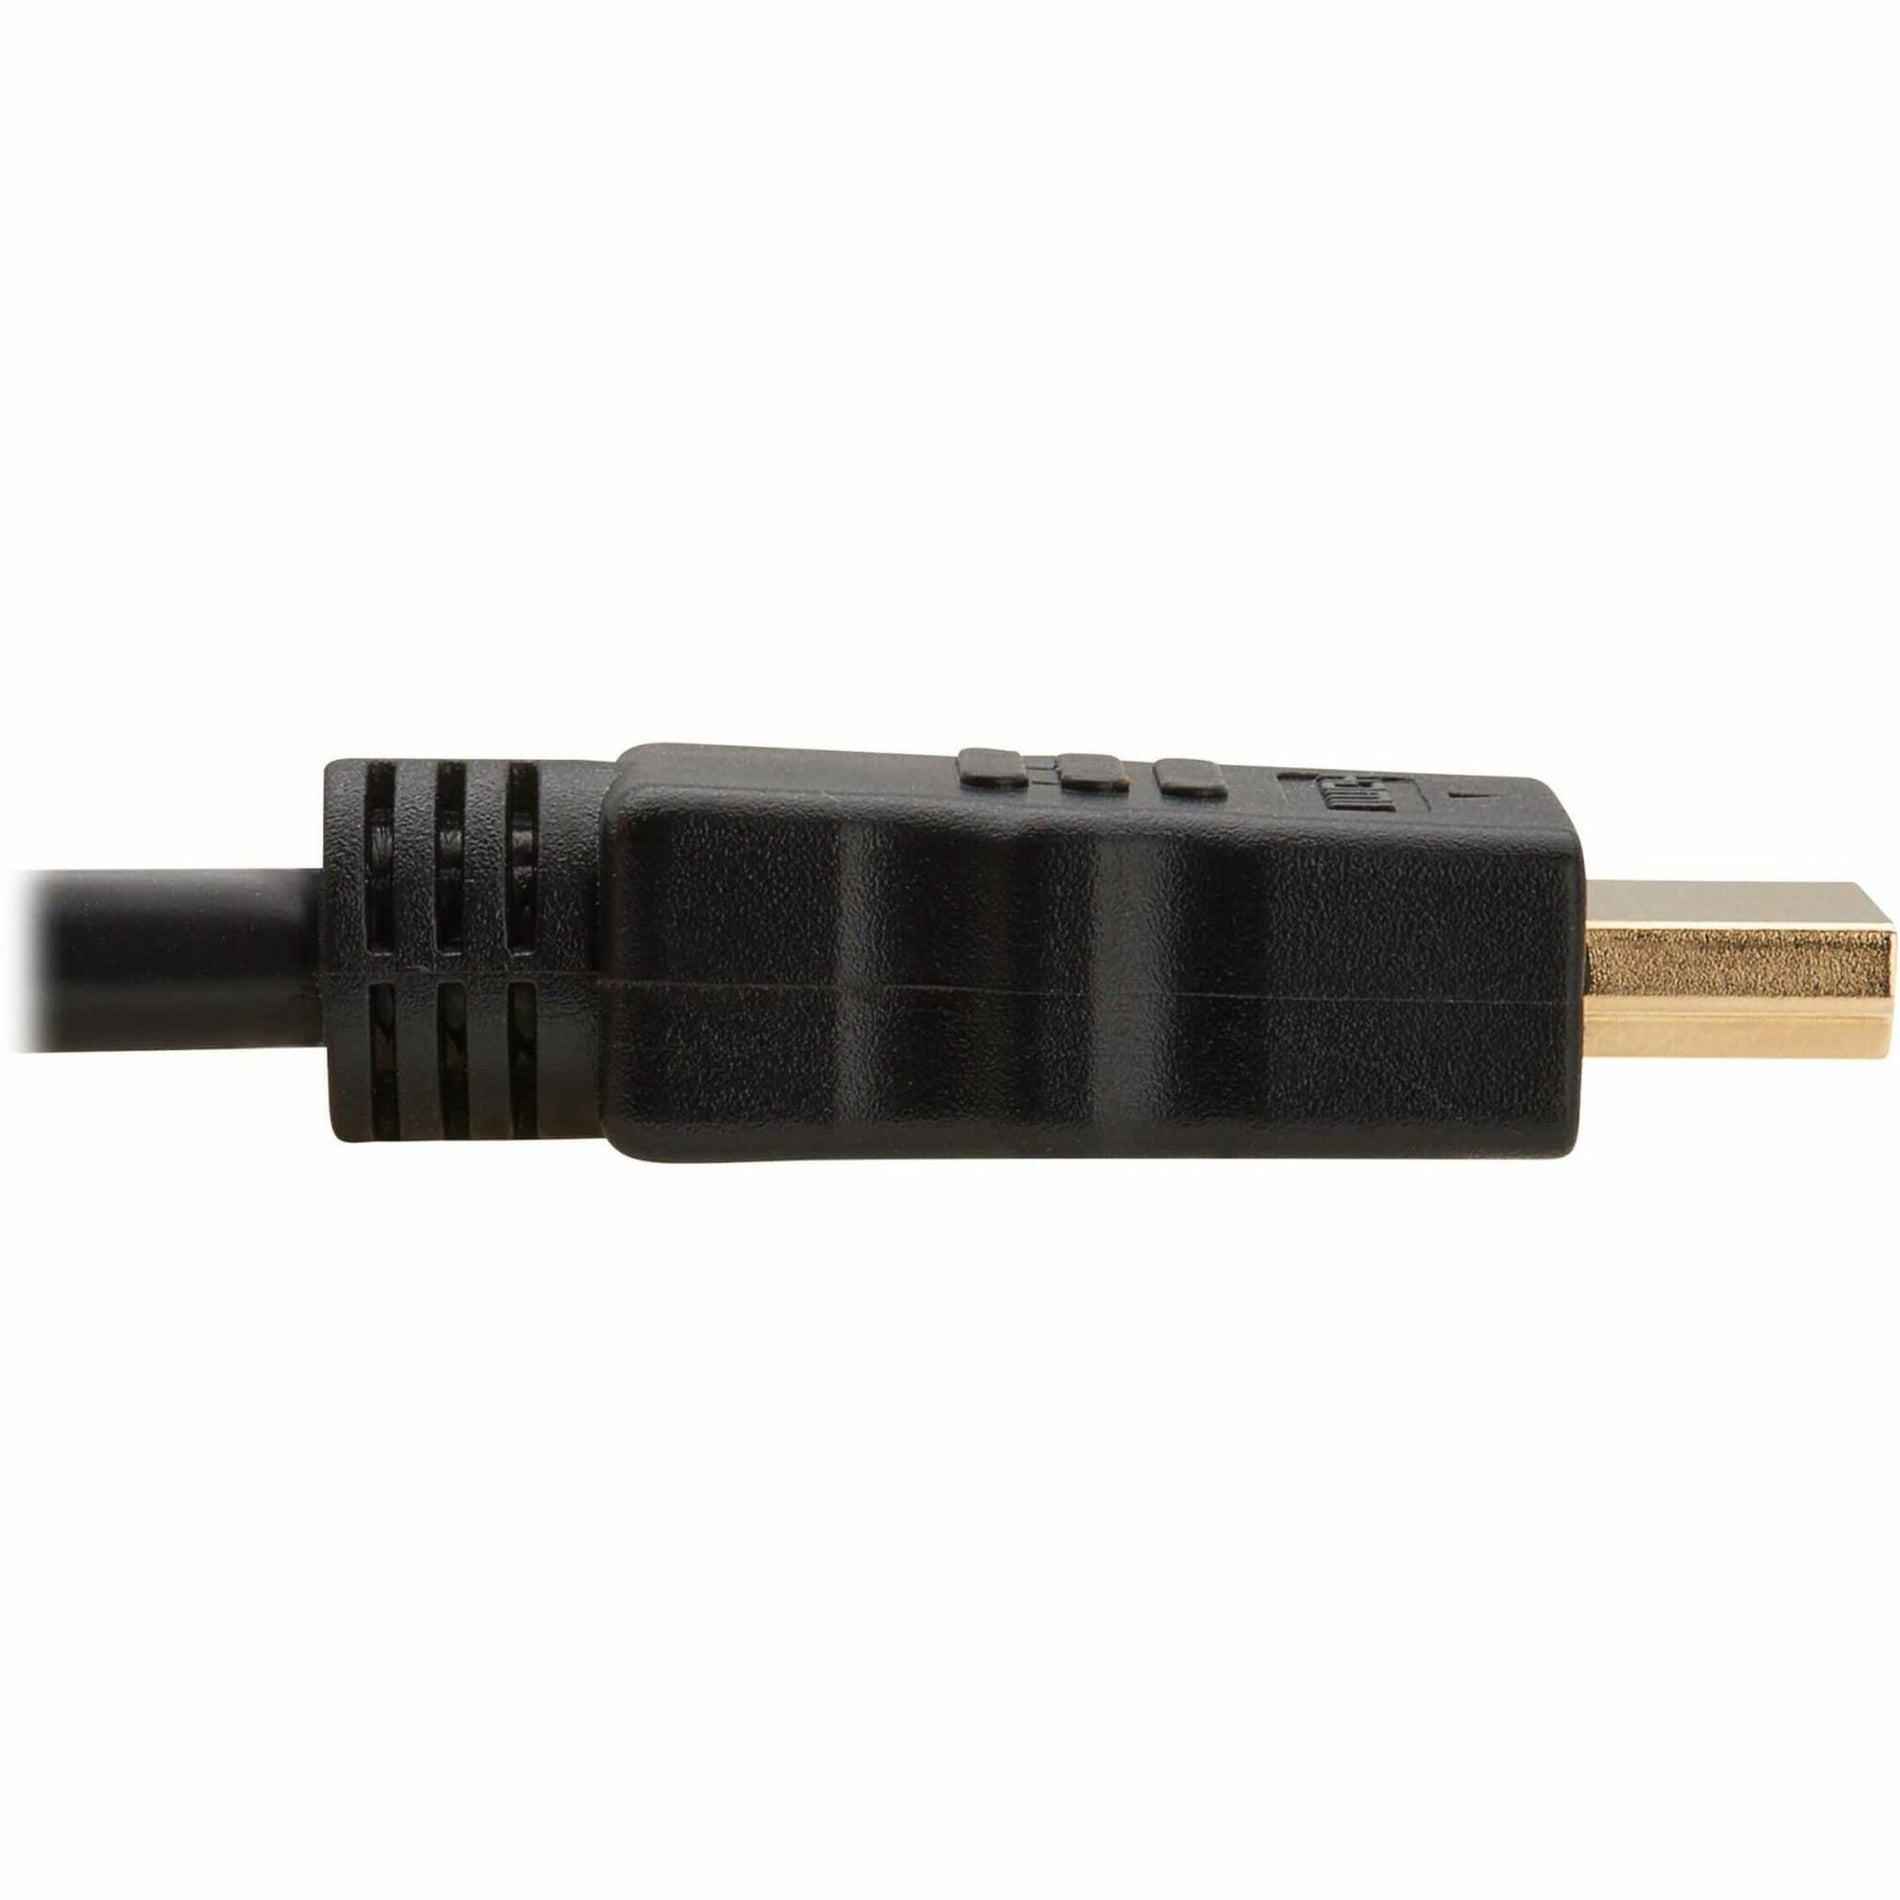 Tripp Lite P568-050 HDMI Gold Digital Video Cable, 50ft, High-Quality Connection for Digital Displays